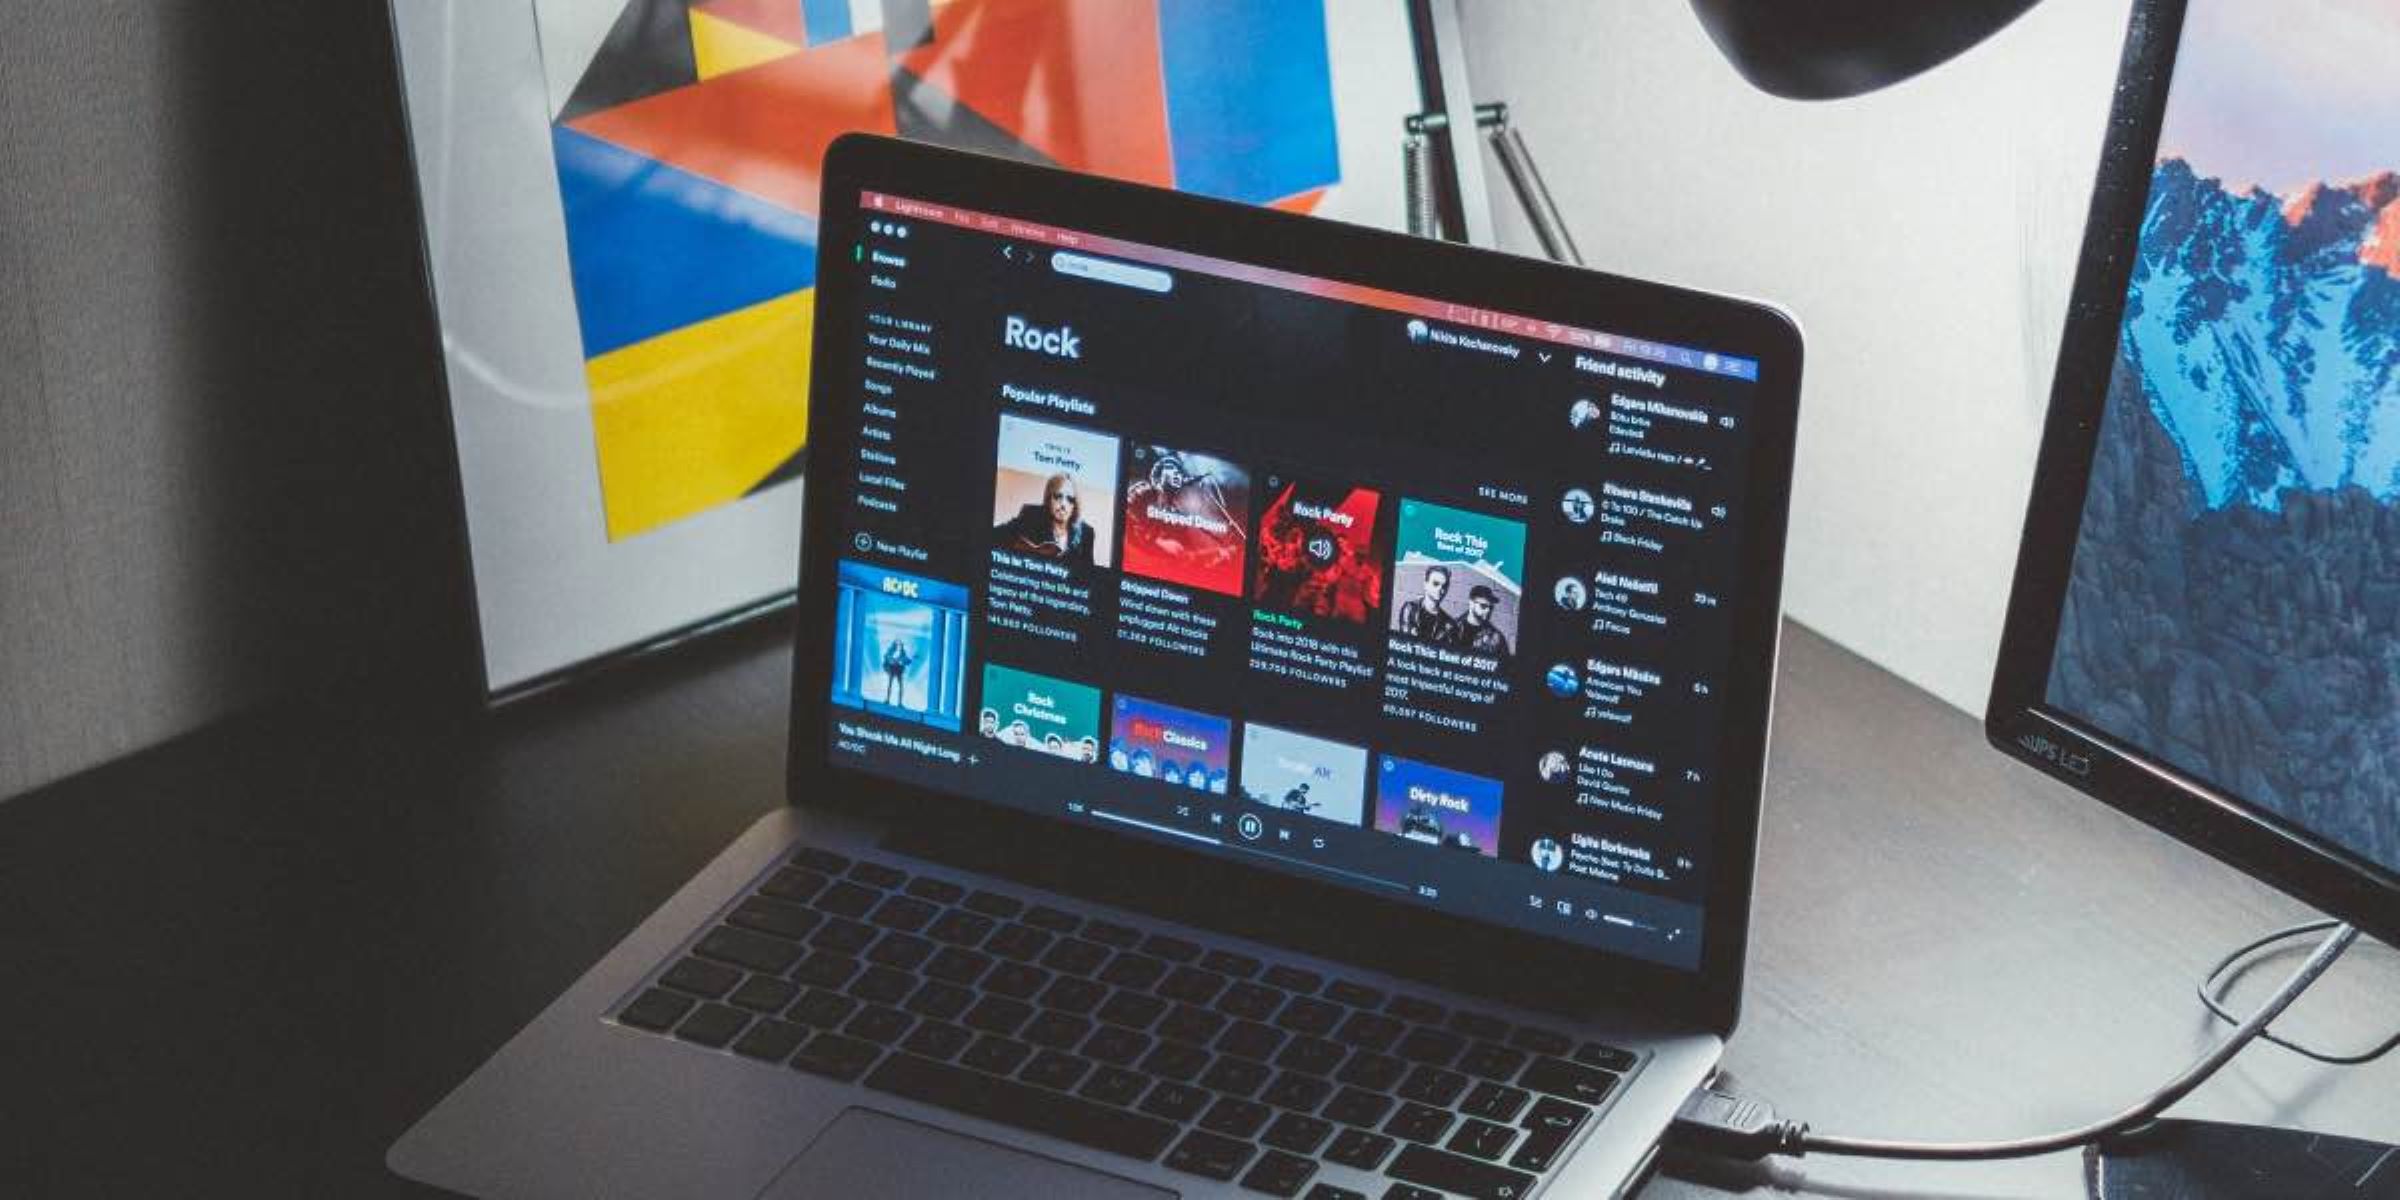 How To Install Spotify On Mac